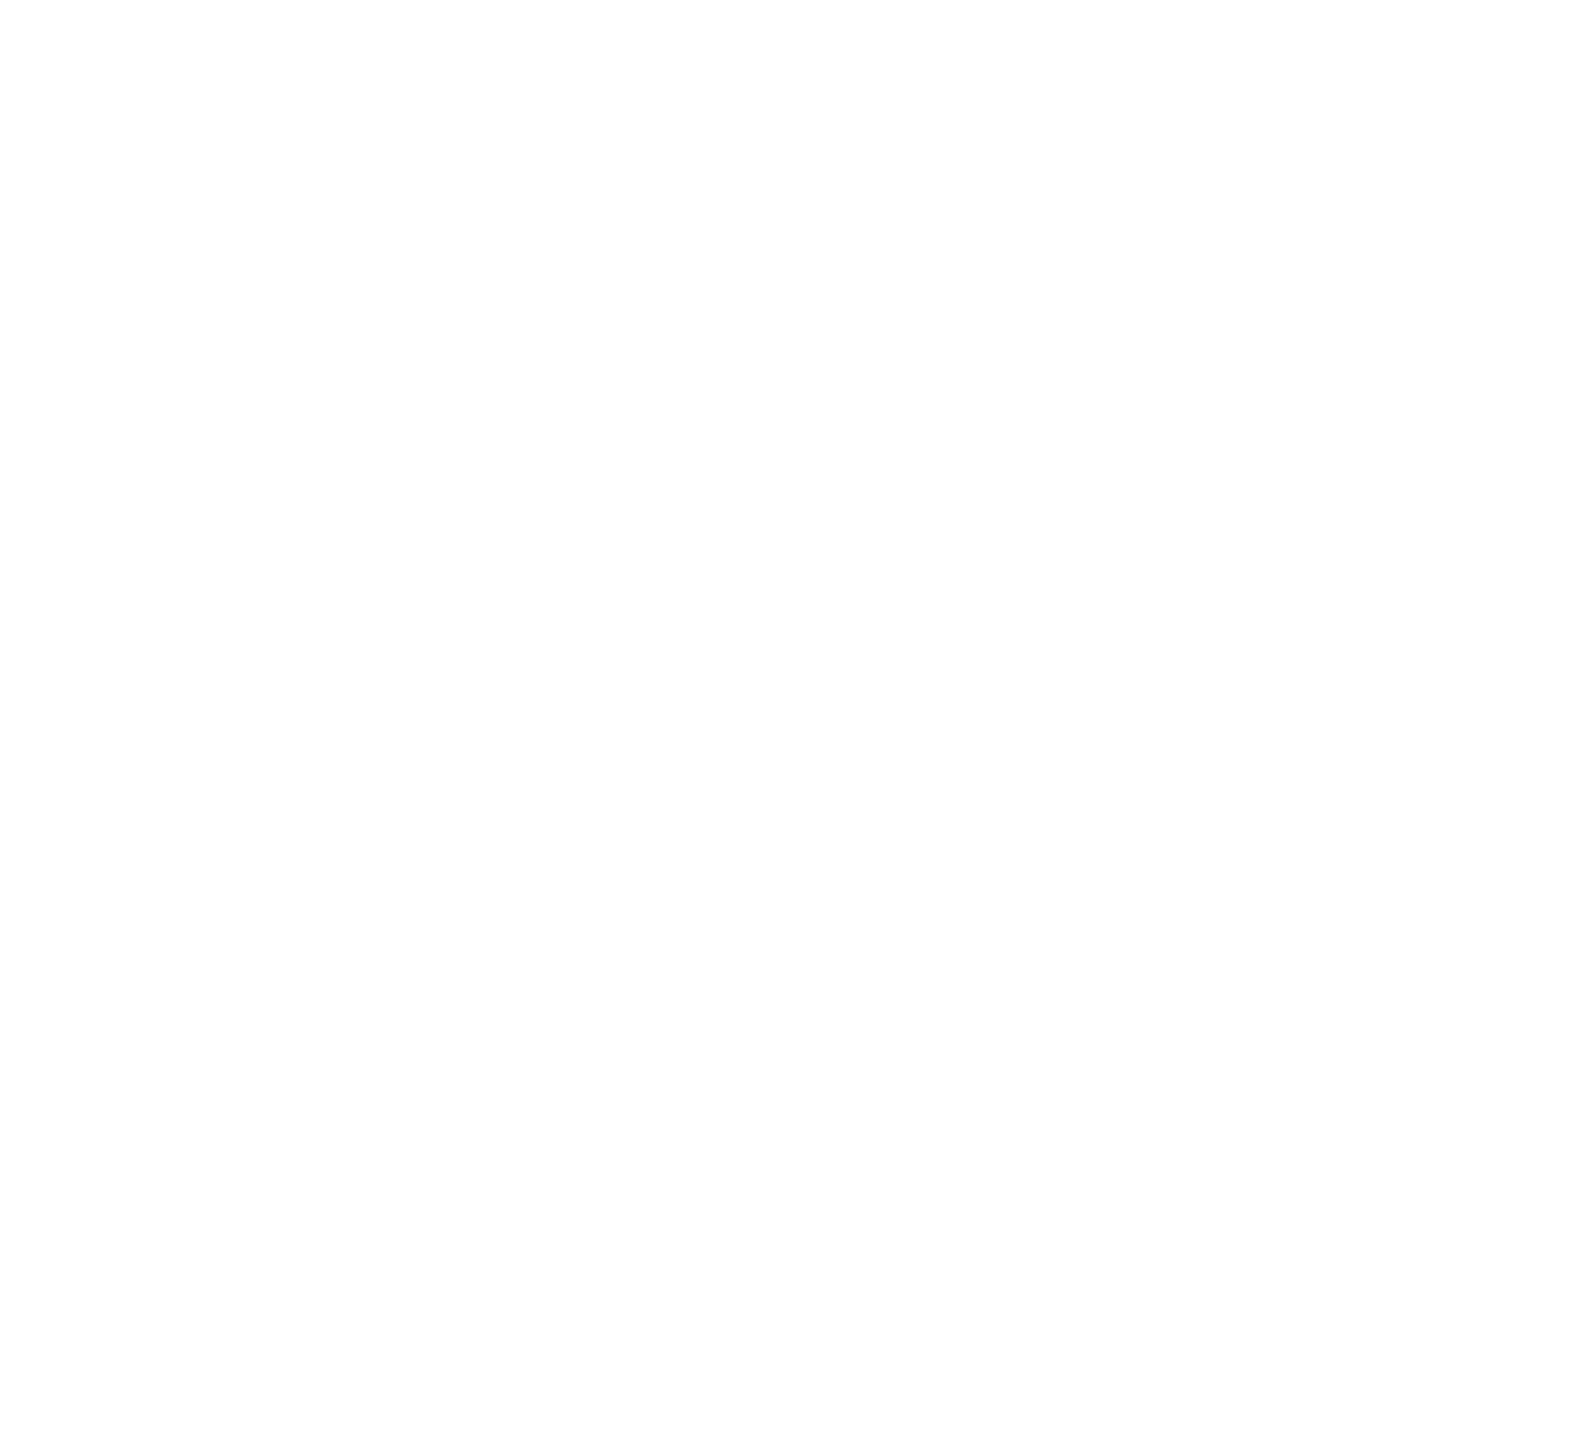 Anora Group logo for dark backgrounds (transparent PNG)